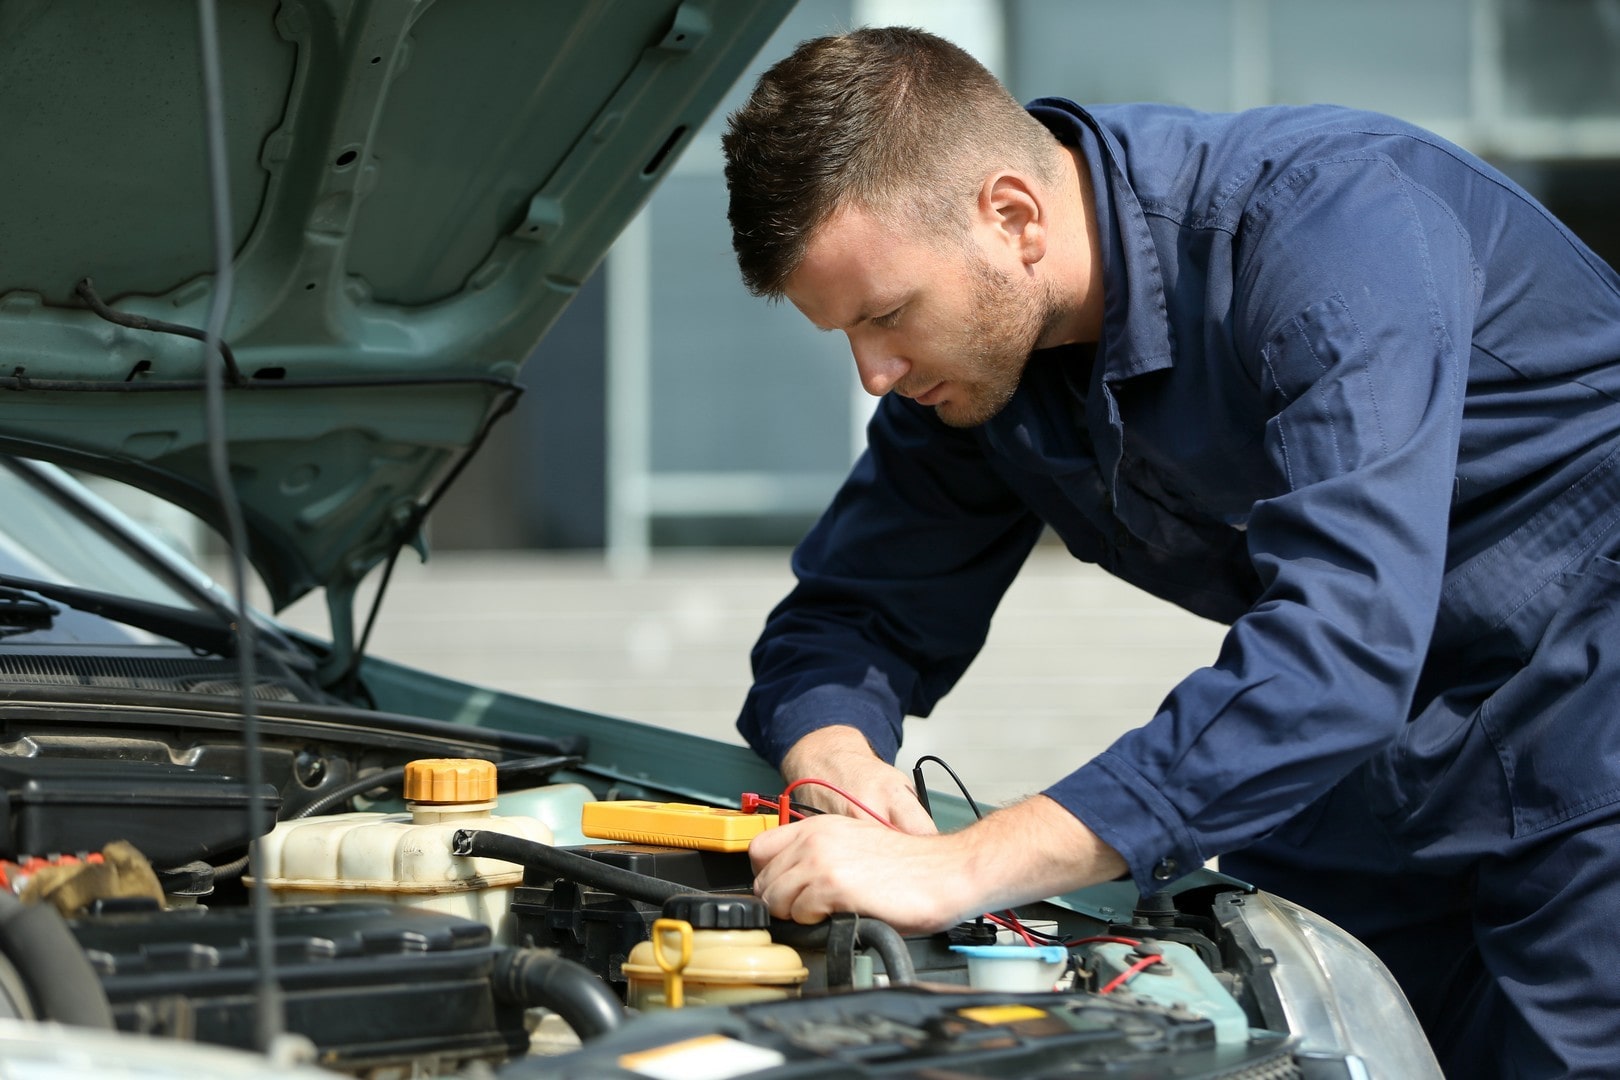 Vehicle repairs and garage services